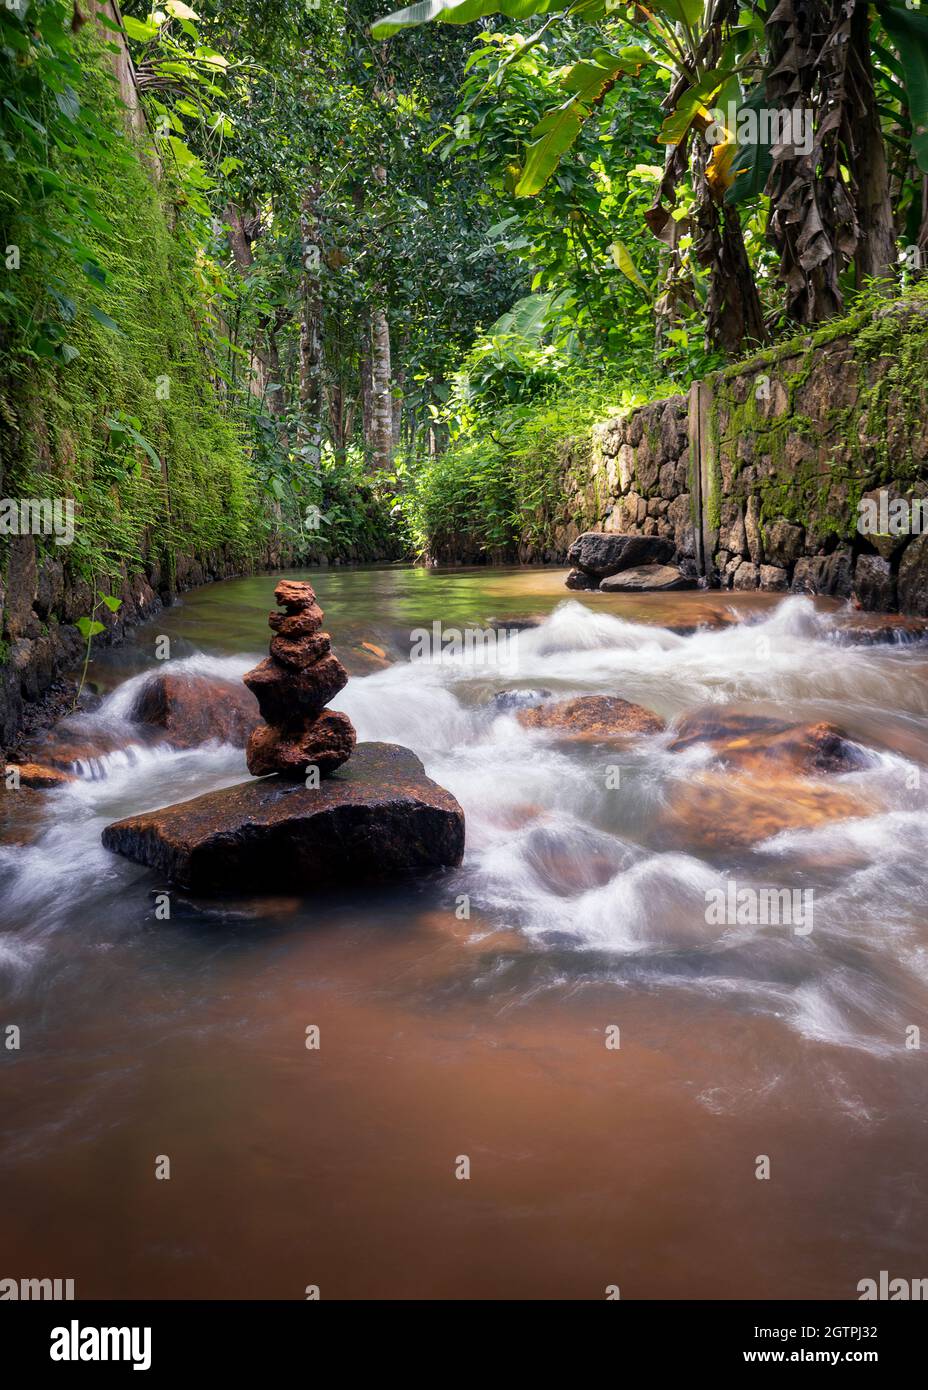 Pristine waters flowing through a forest stream Stock Photo